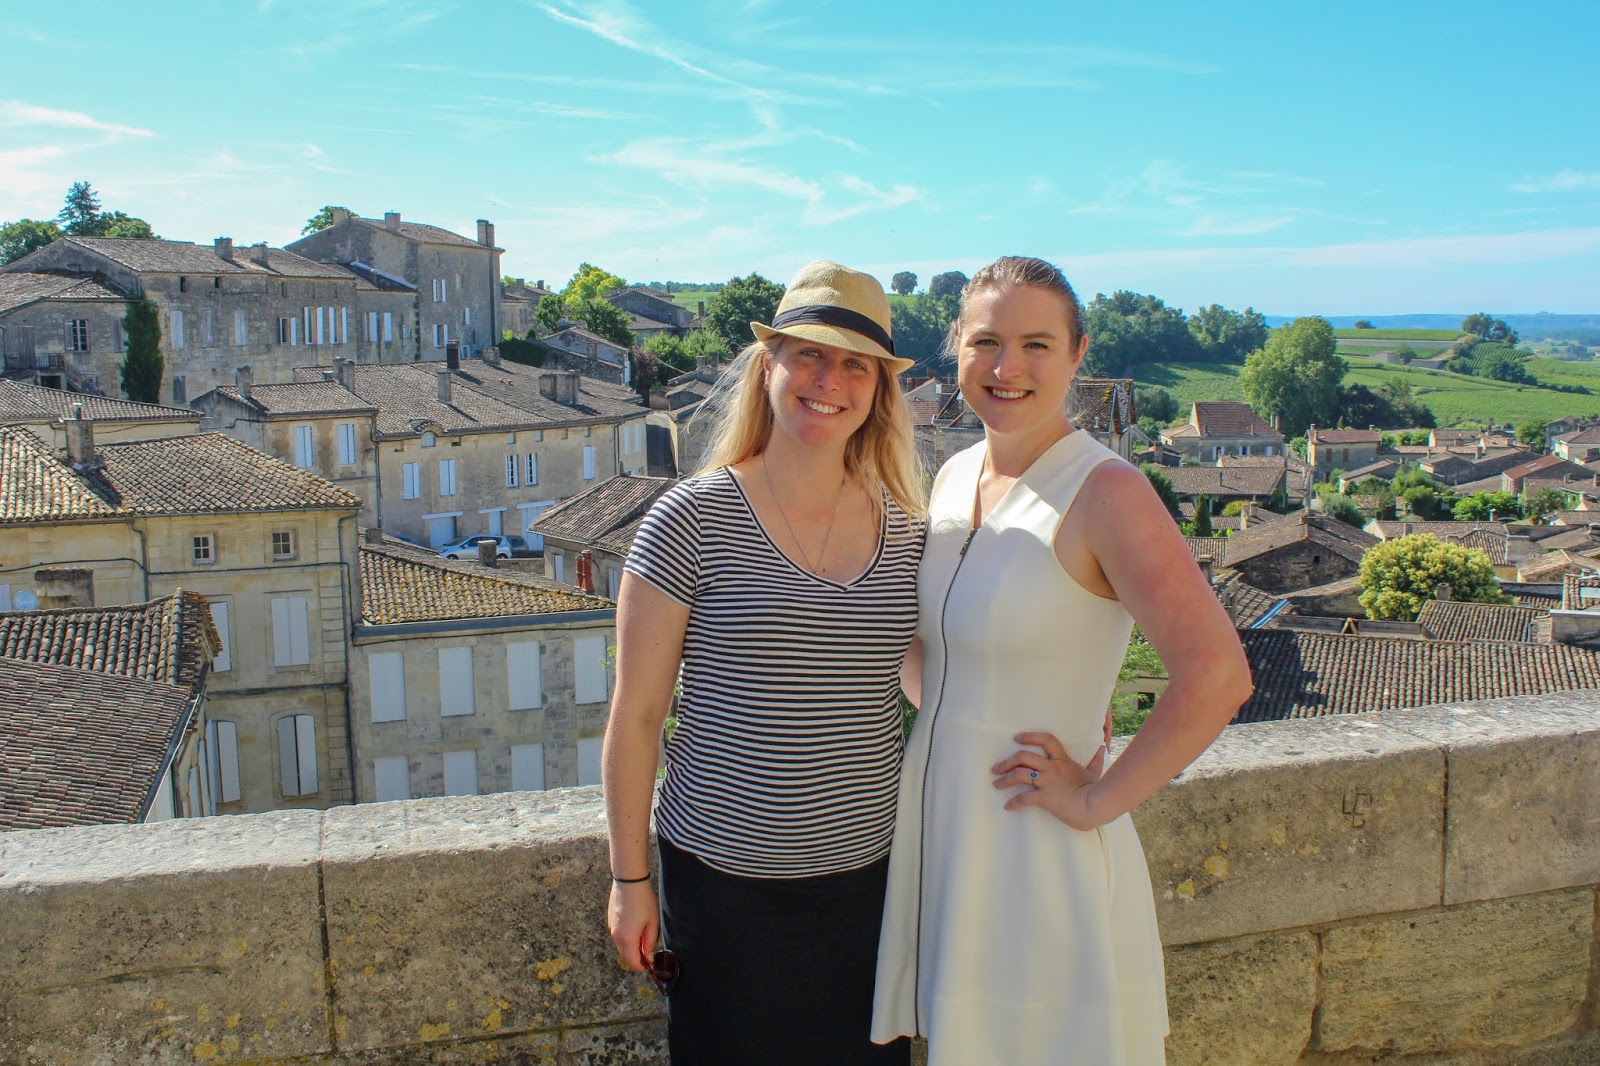 Chateaux & Merlot in Bordeaux, France - This Celebrated Life